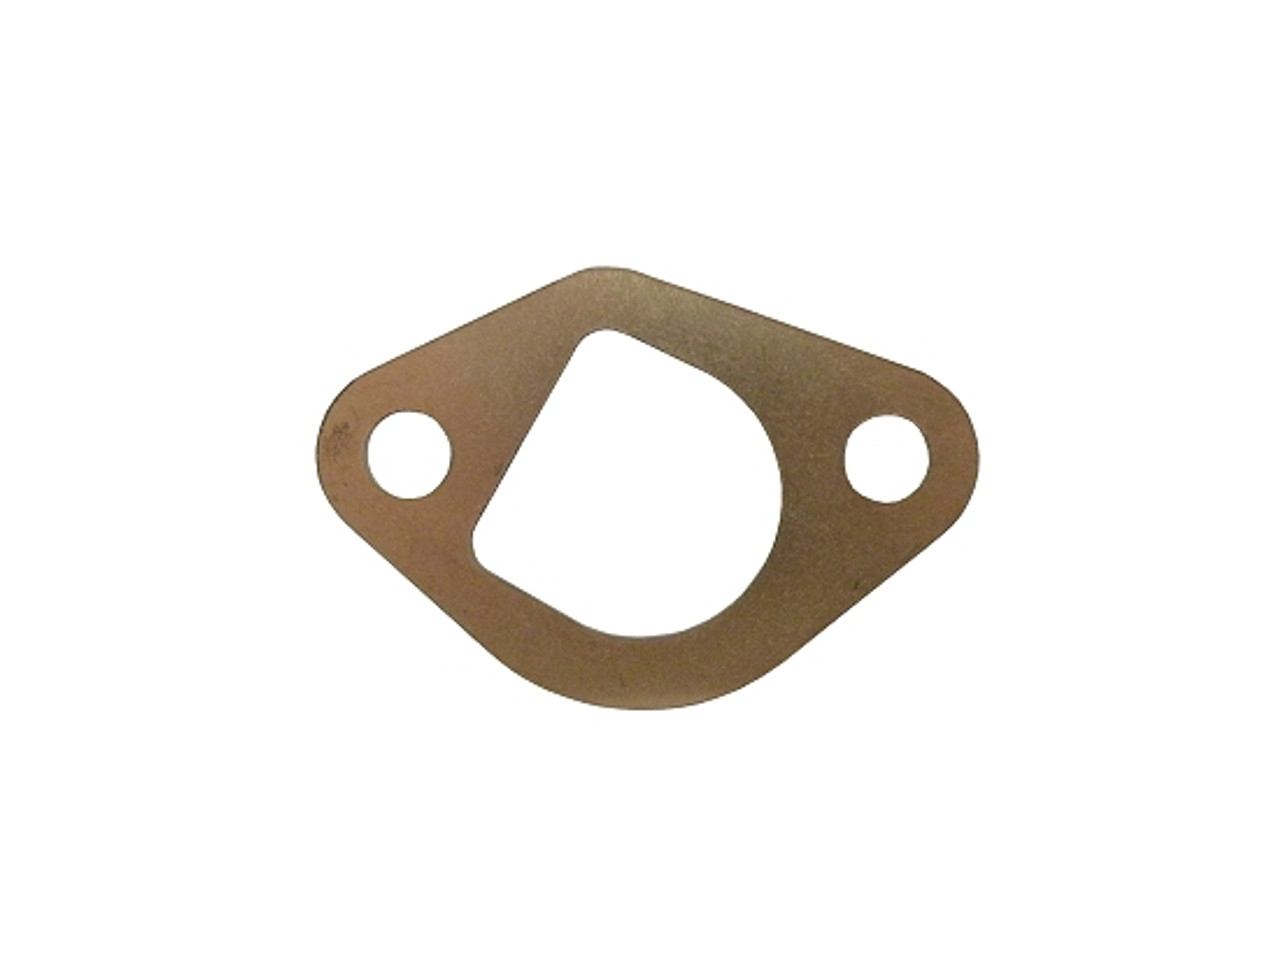 Clone Copper Exhaust Gasket - qty 5